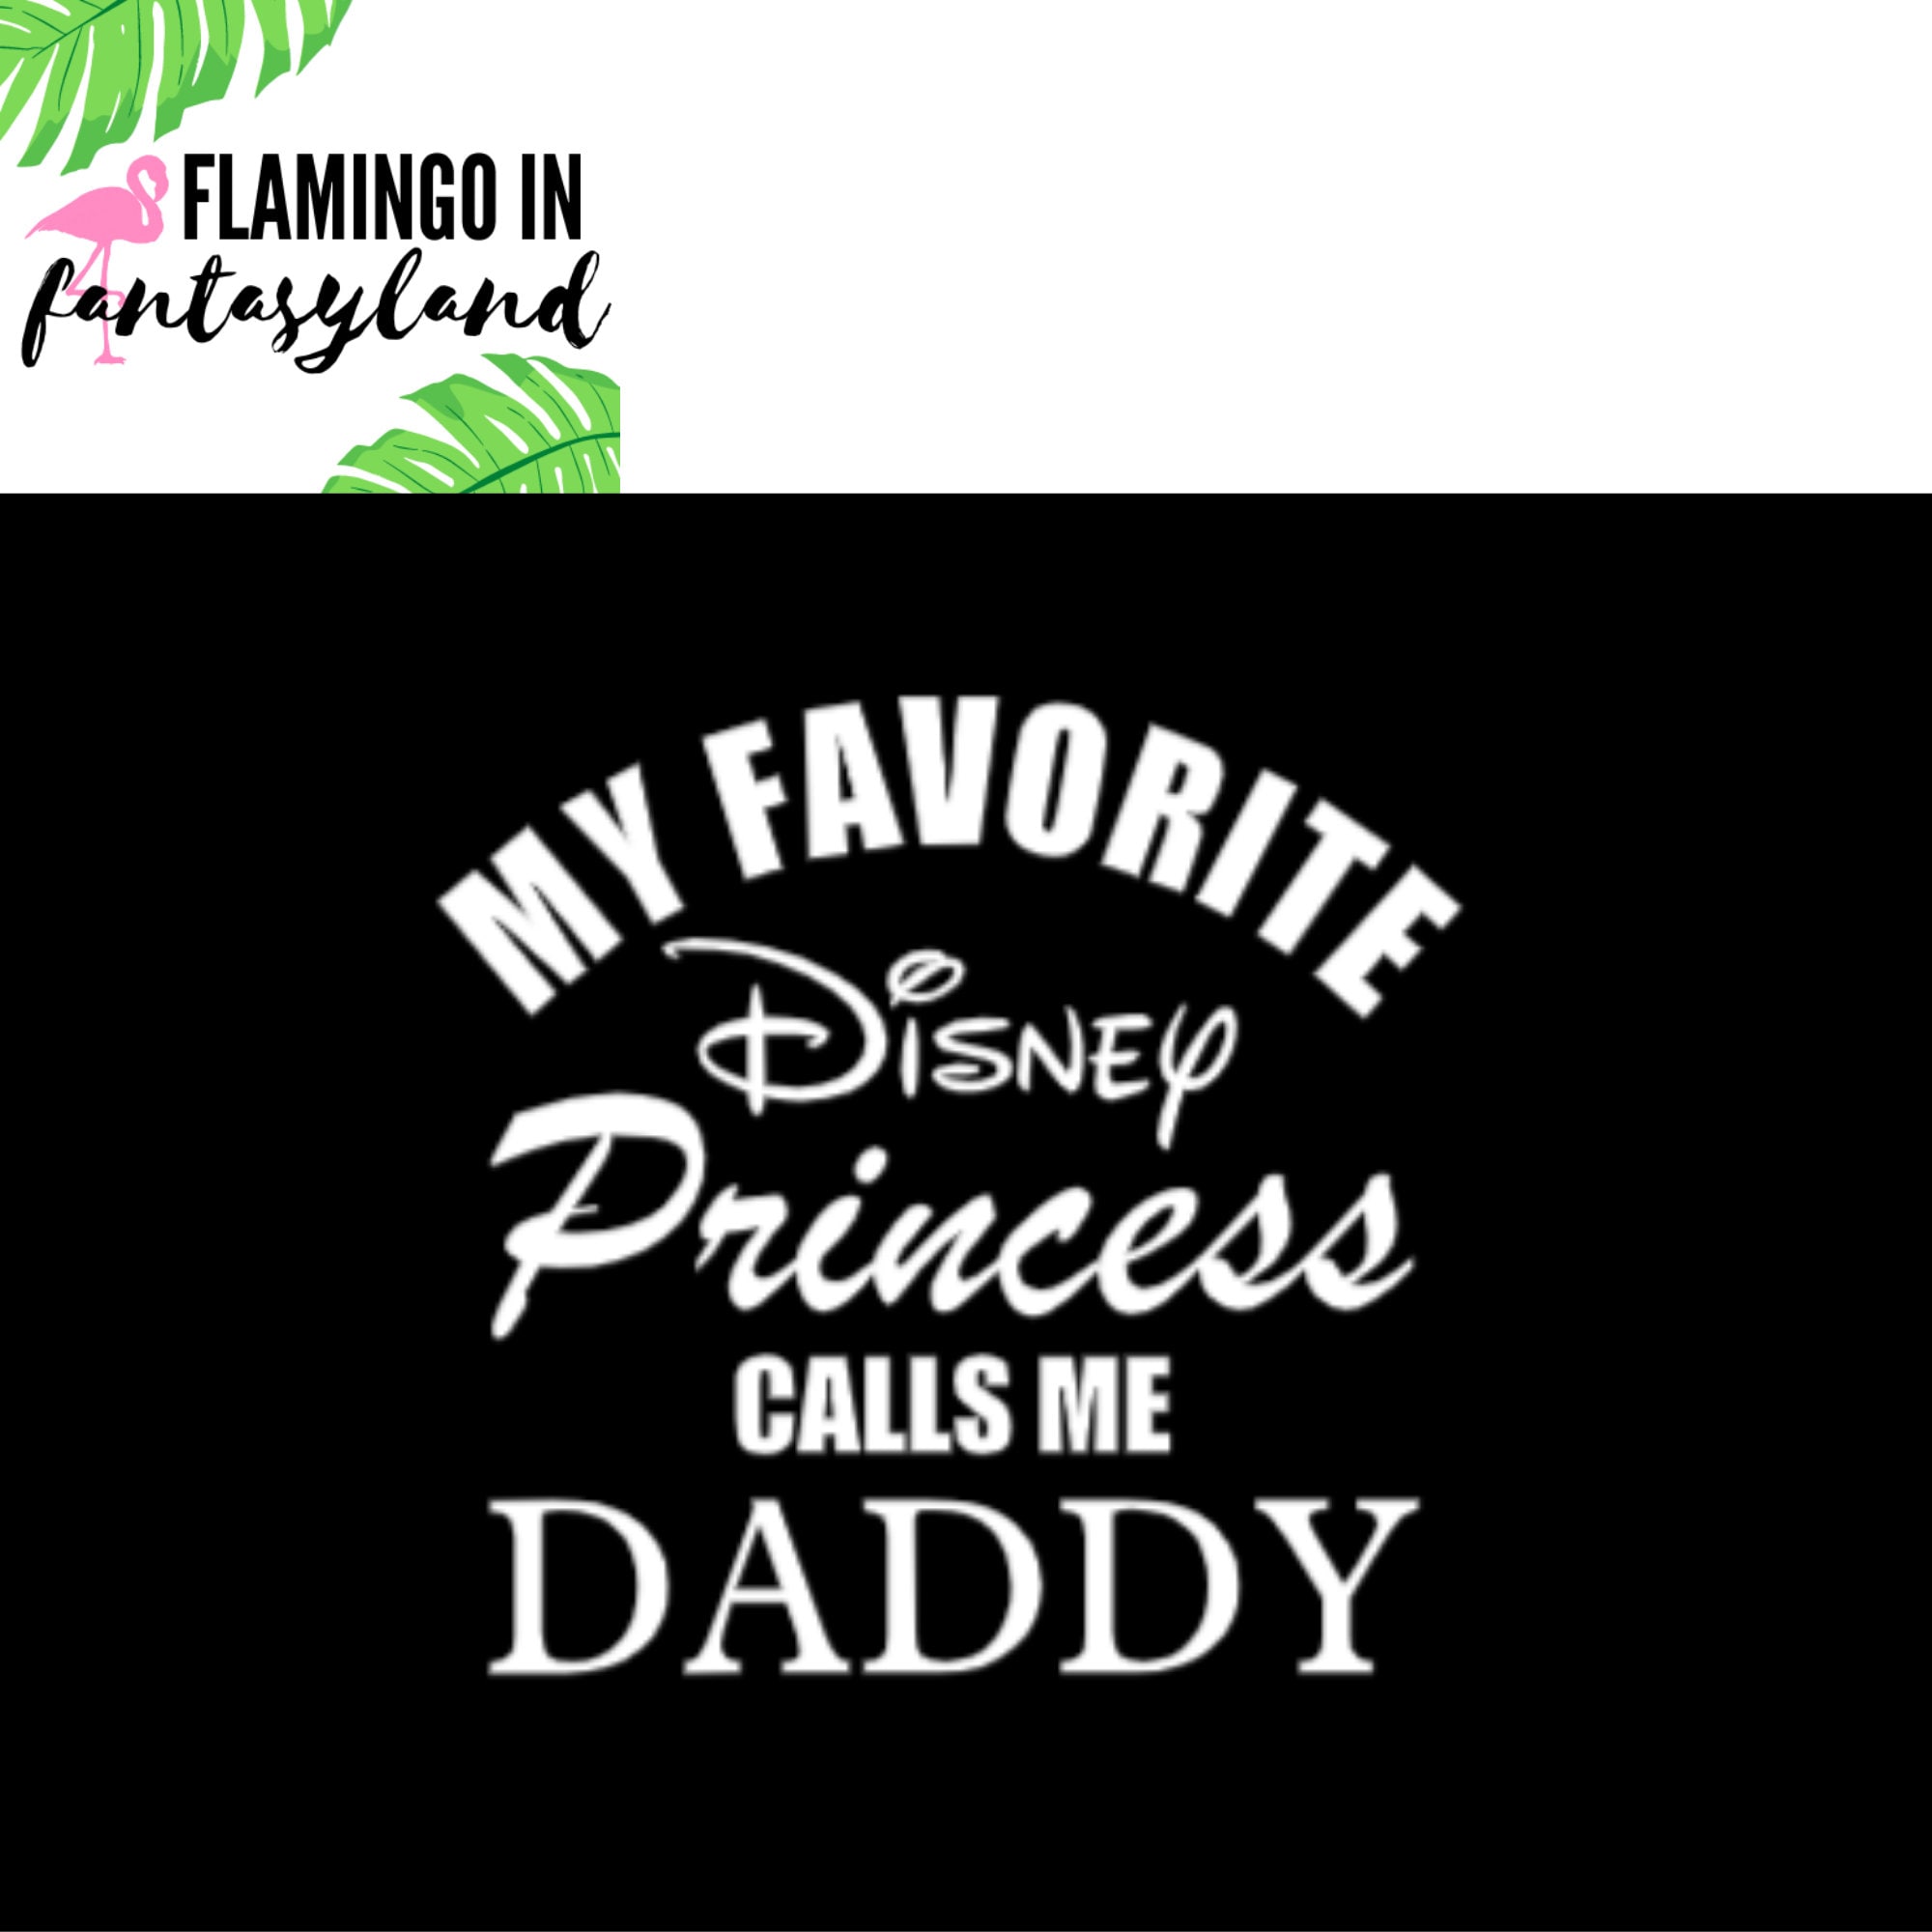 charmaine khan recommends My Favorite Disney Princess Calls Me Daddy